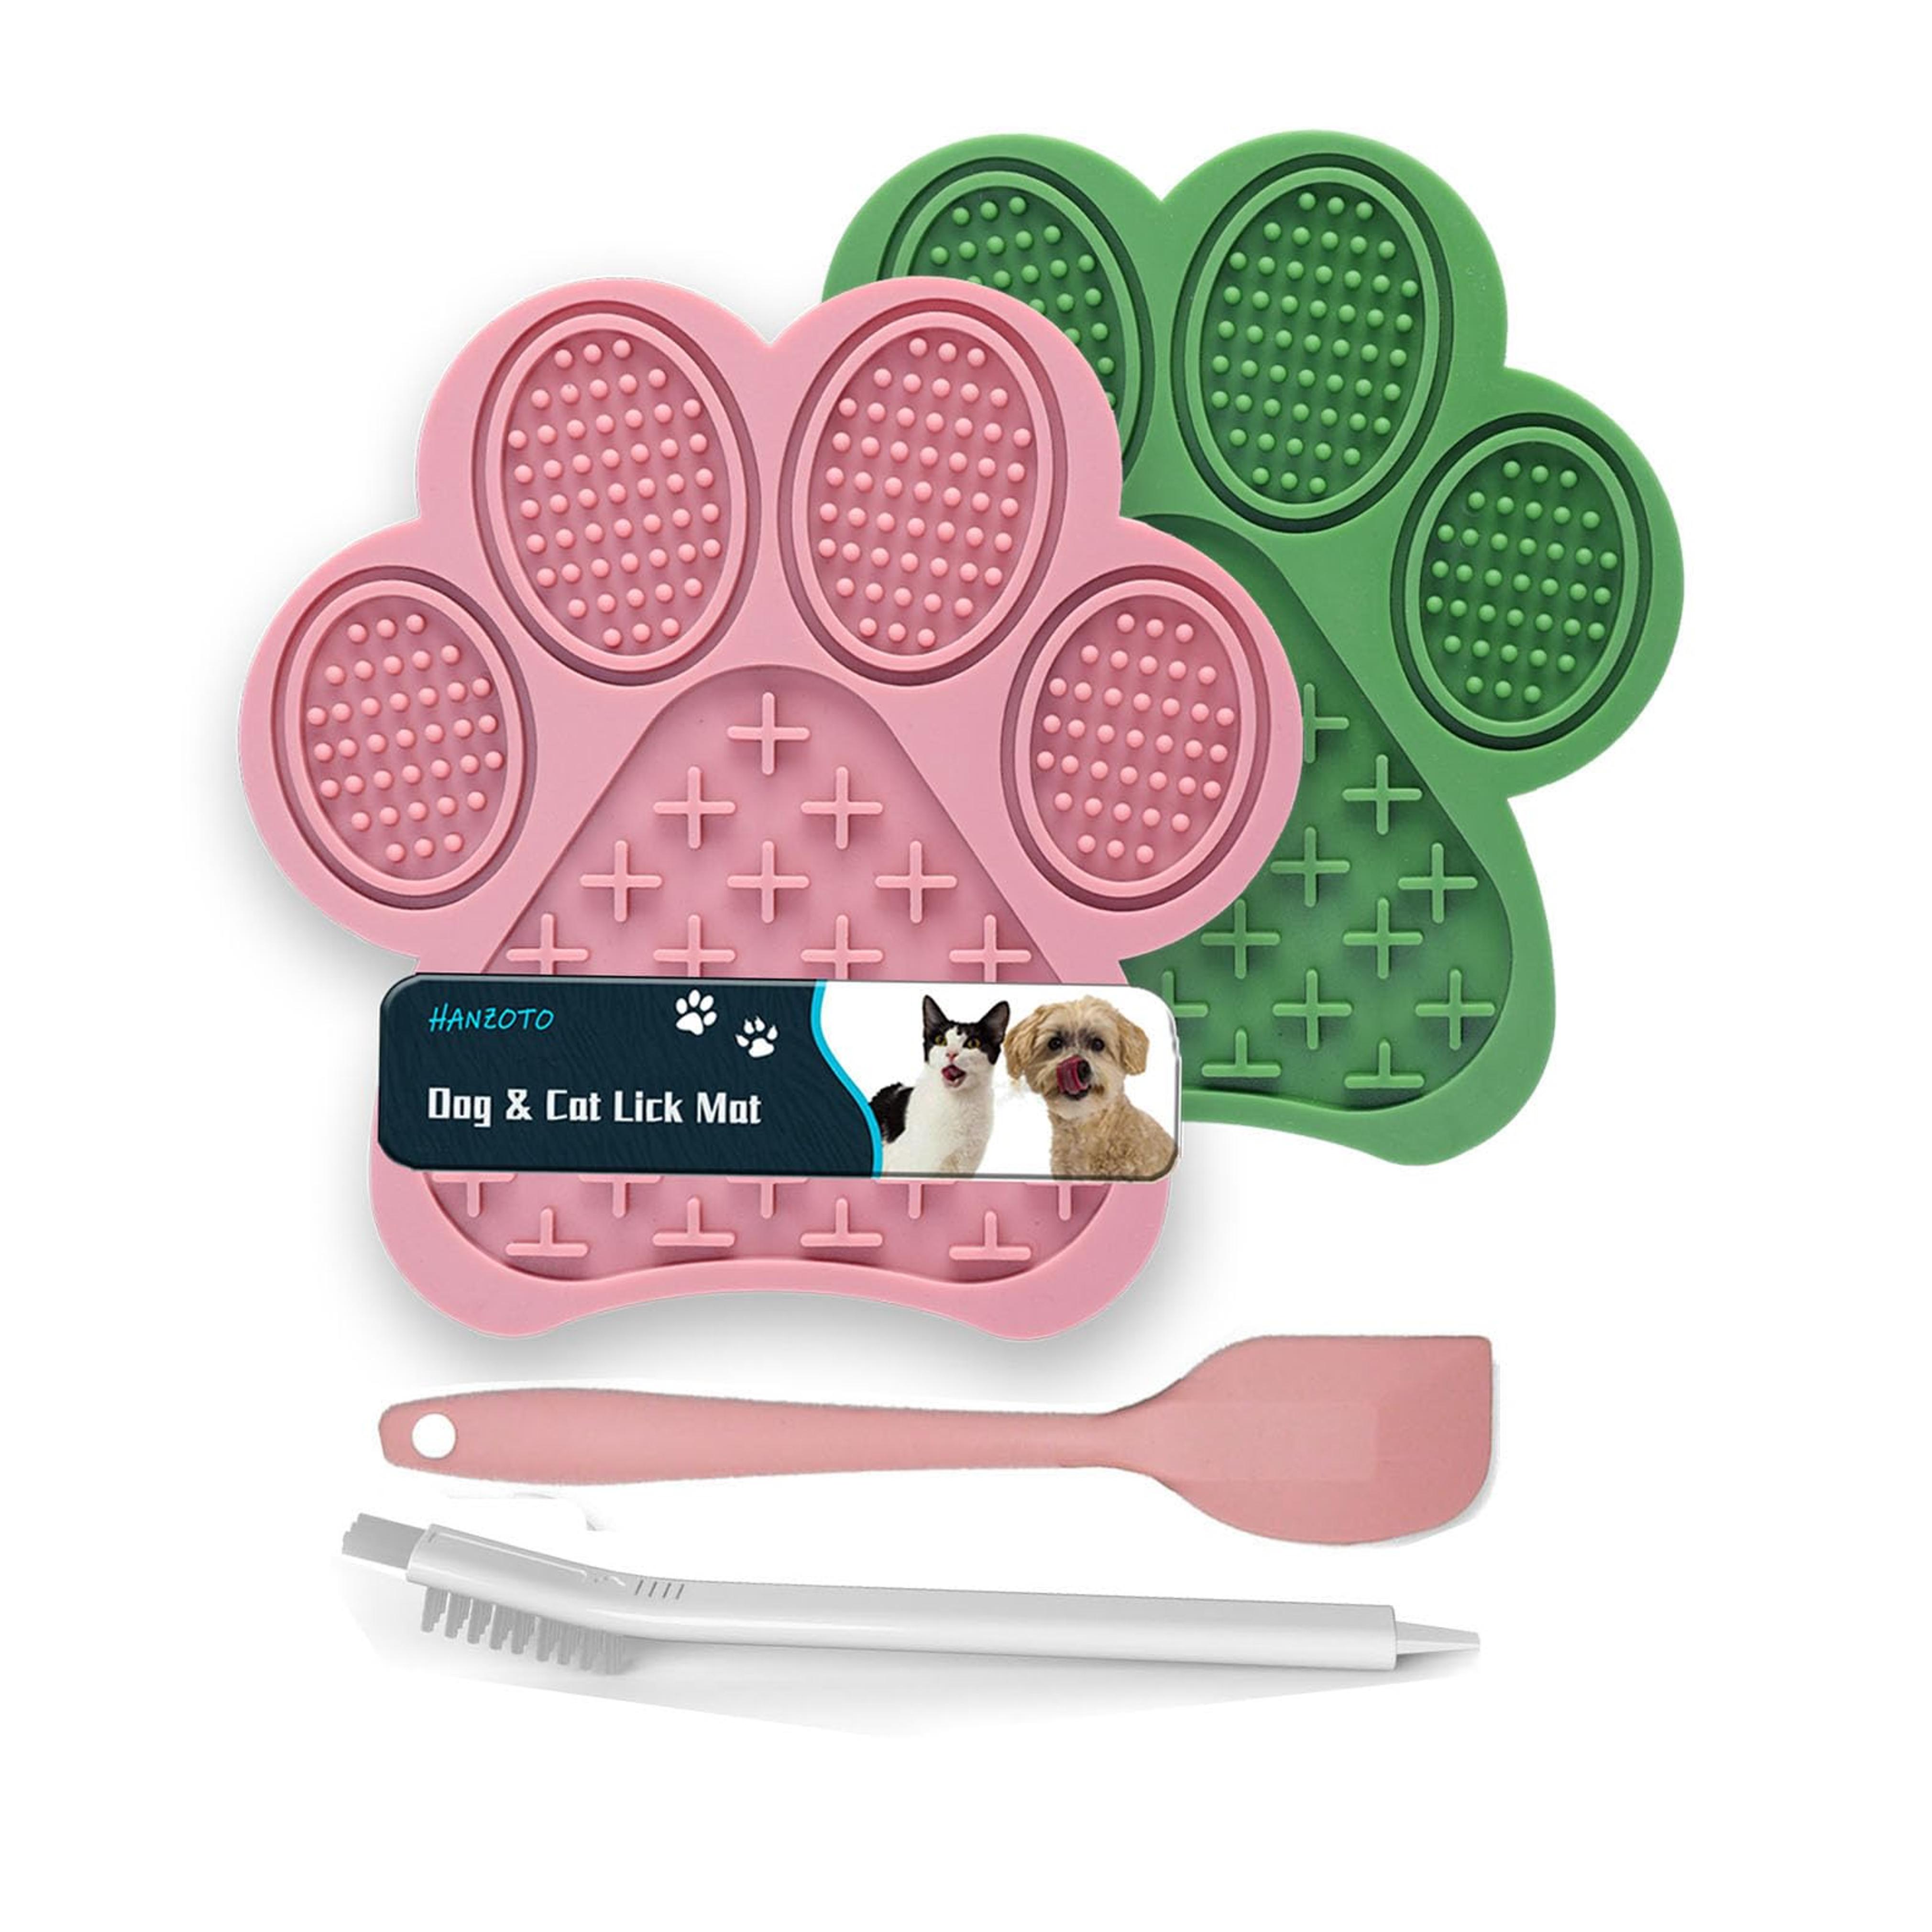 Lick Mat for Dogs and Cats, Premium Lick Pad with Suction Cups,Dog Slow Feeder Dowl Mat for Bathing Grooming Nailing Trimming, Food-Grade, Non-Toxic (Pink&Green)